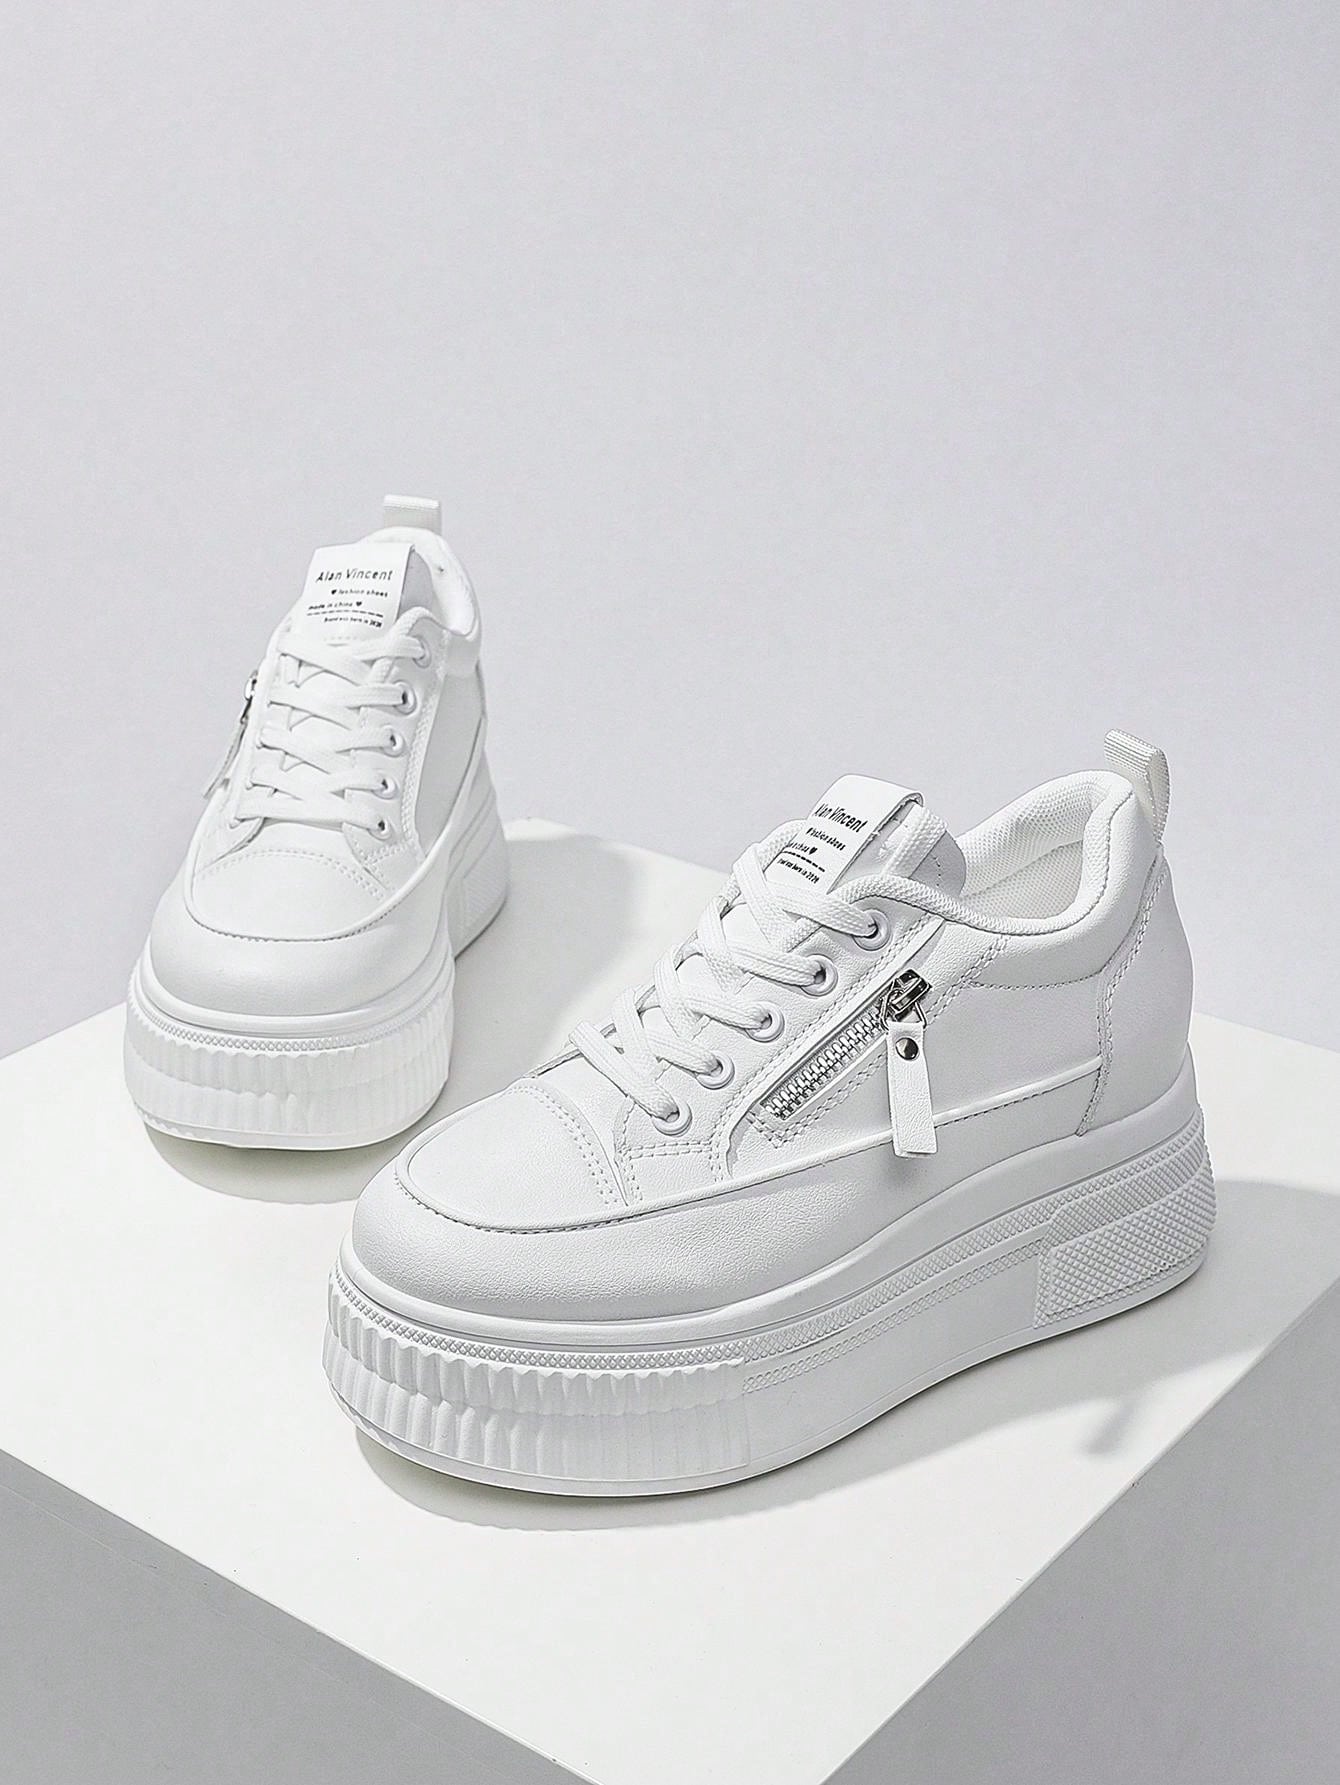 New Style Casual Shoes For Women, Ladies Platform Shoes With  Zipper, White Shoes, Outdoor Comfortable Sneakers, Internal Increase 5cm, Party Shoes, Suitable For Short Women-White-9